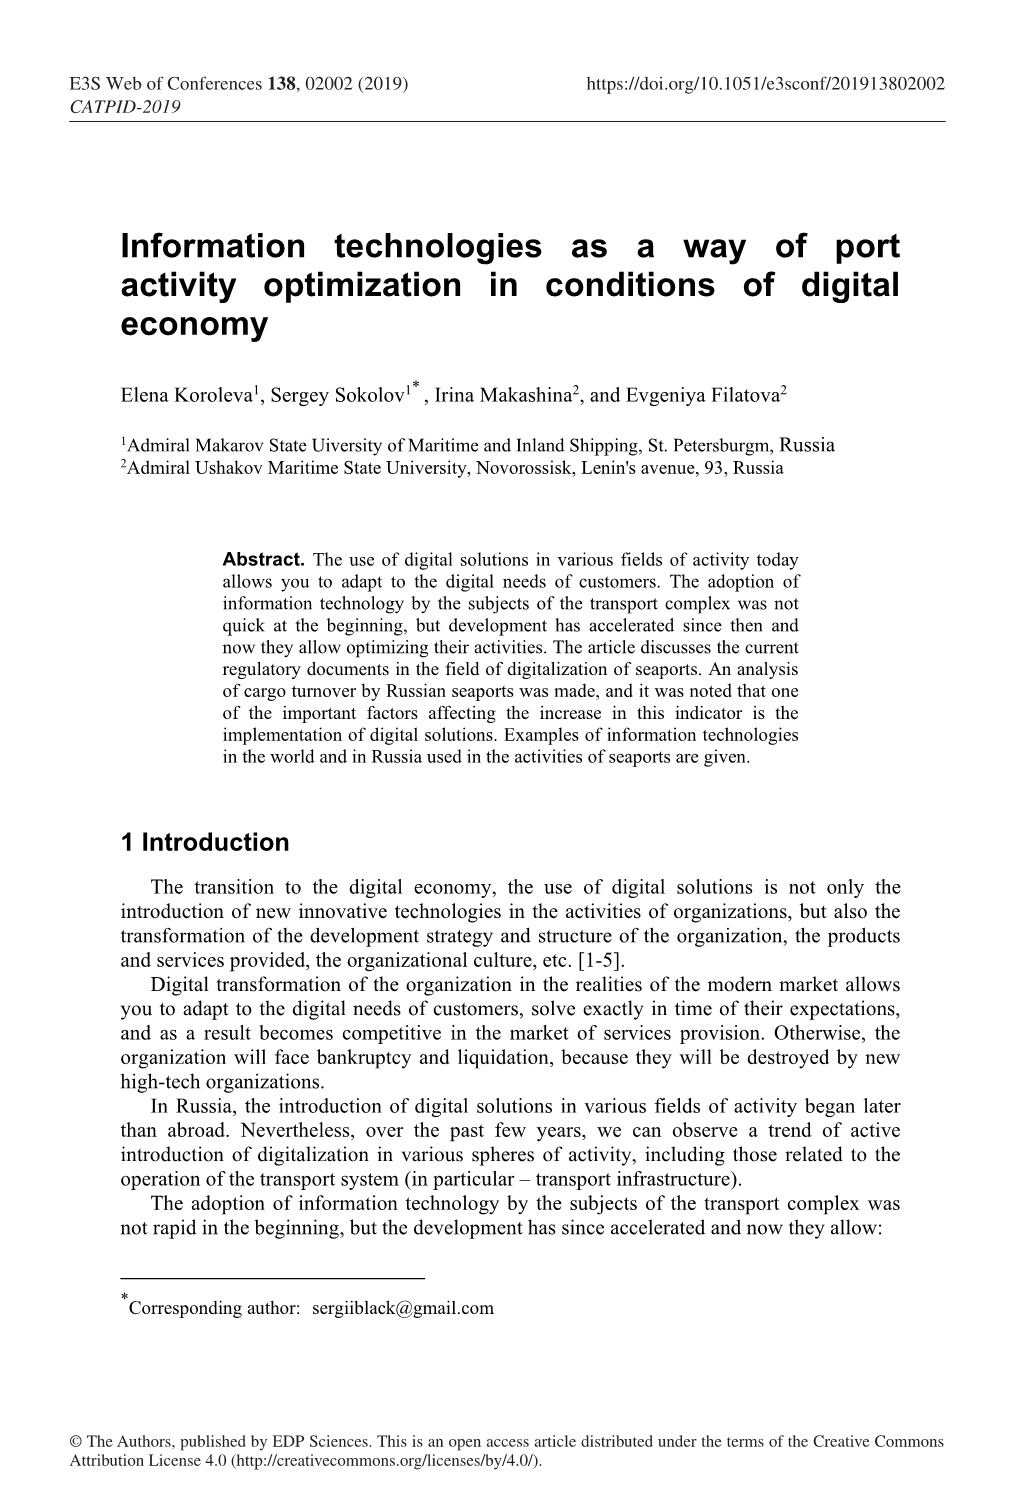 Information Technologies As a Way of Port Activity Optimization in Conditions of Digital Economy